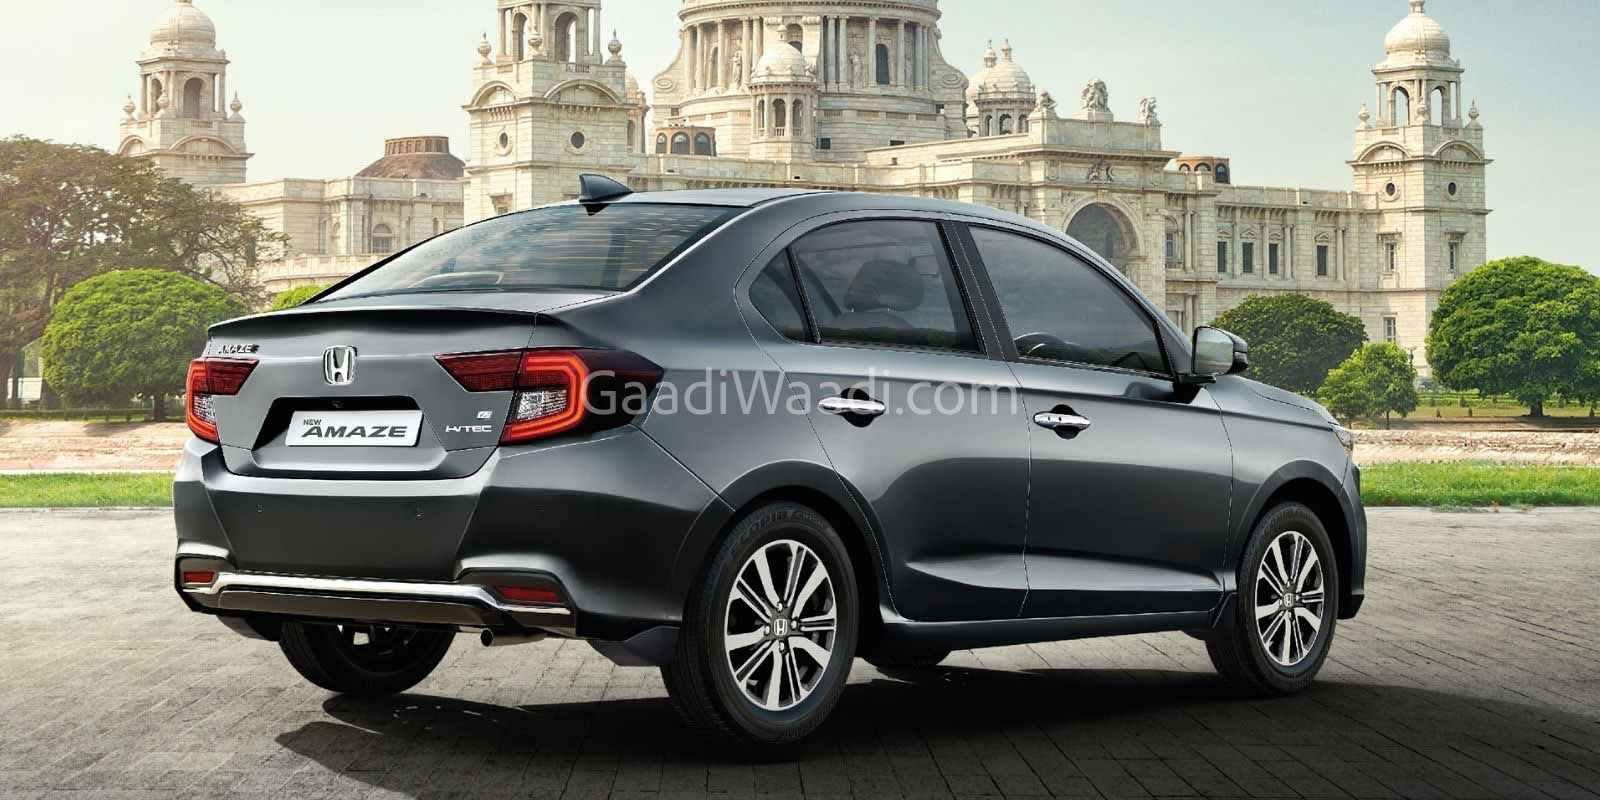 2021 Honda Amaze Facelift Launched; Priced From Rs. 7.16 Lakh